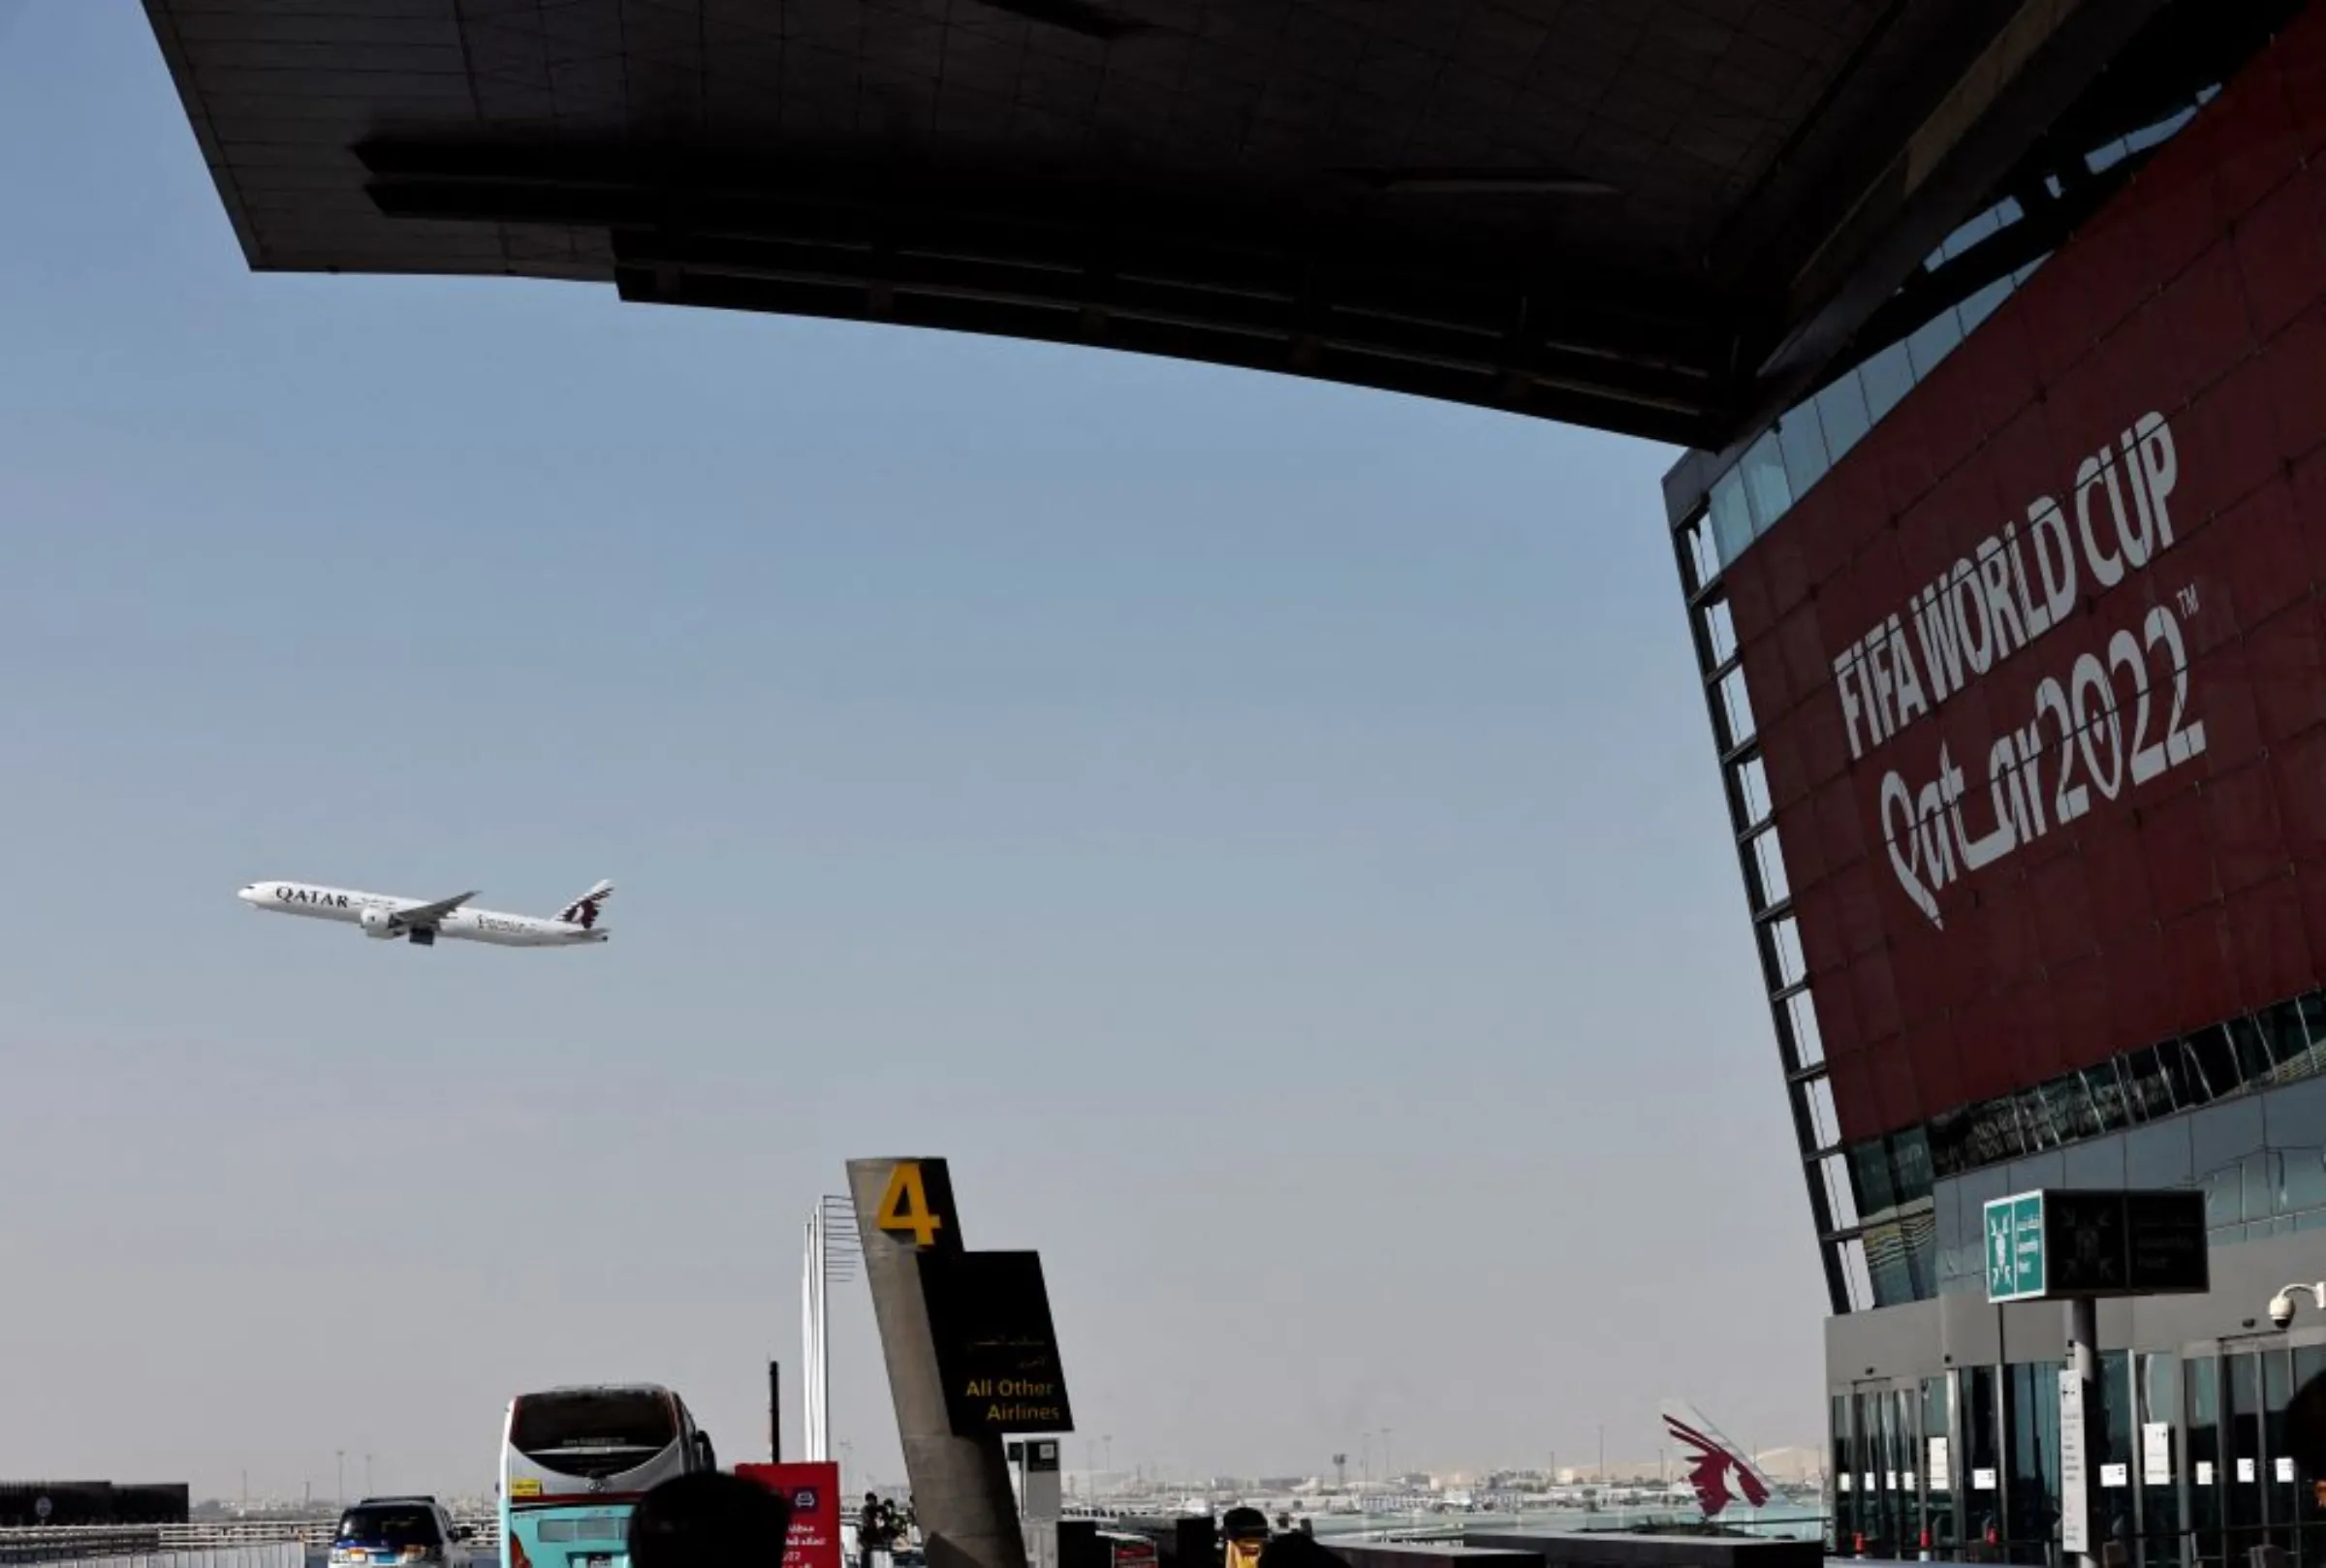 A Qatar World Cup promotion is seen with a Qatar Airways aeroplane in flight at Hamad International Airport ahead of the World Cup, Doha, Qatar. November 10, 2022. REUTERS/Hamad I Mohammed